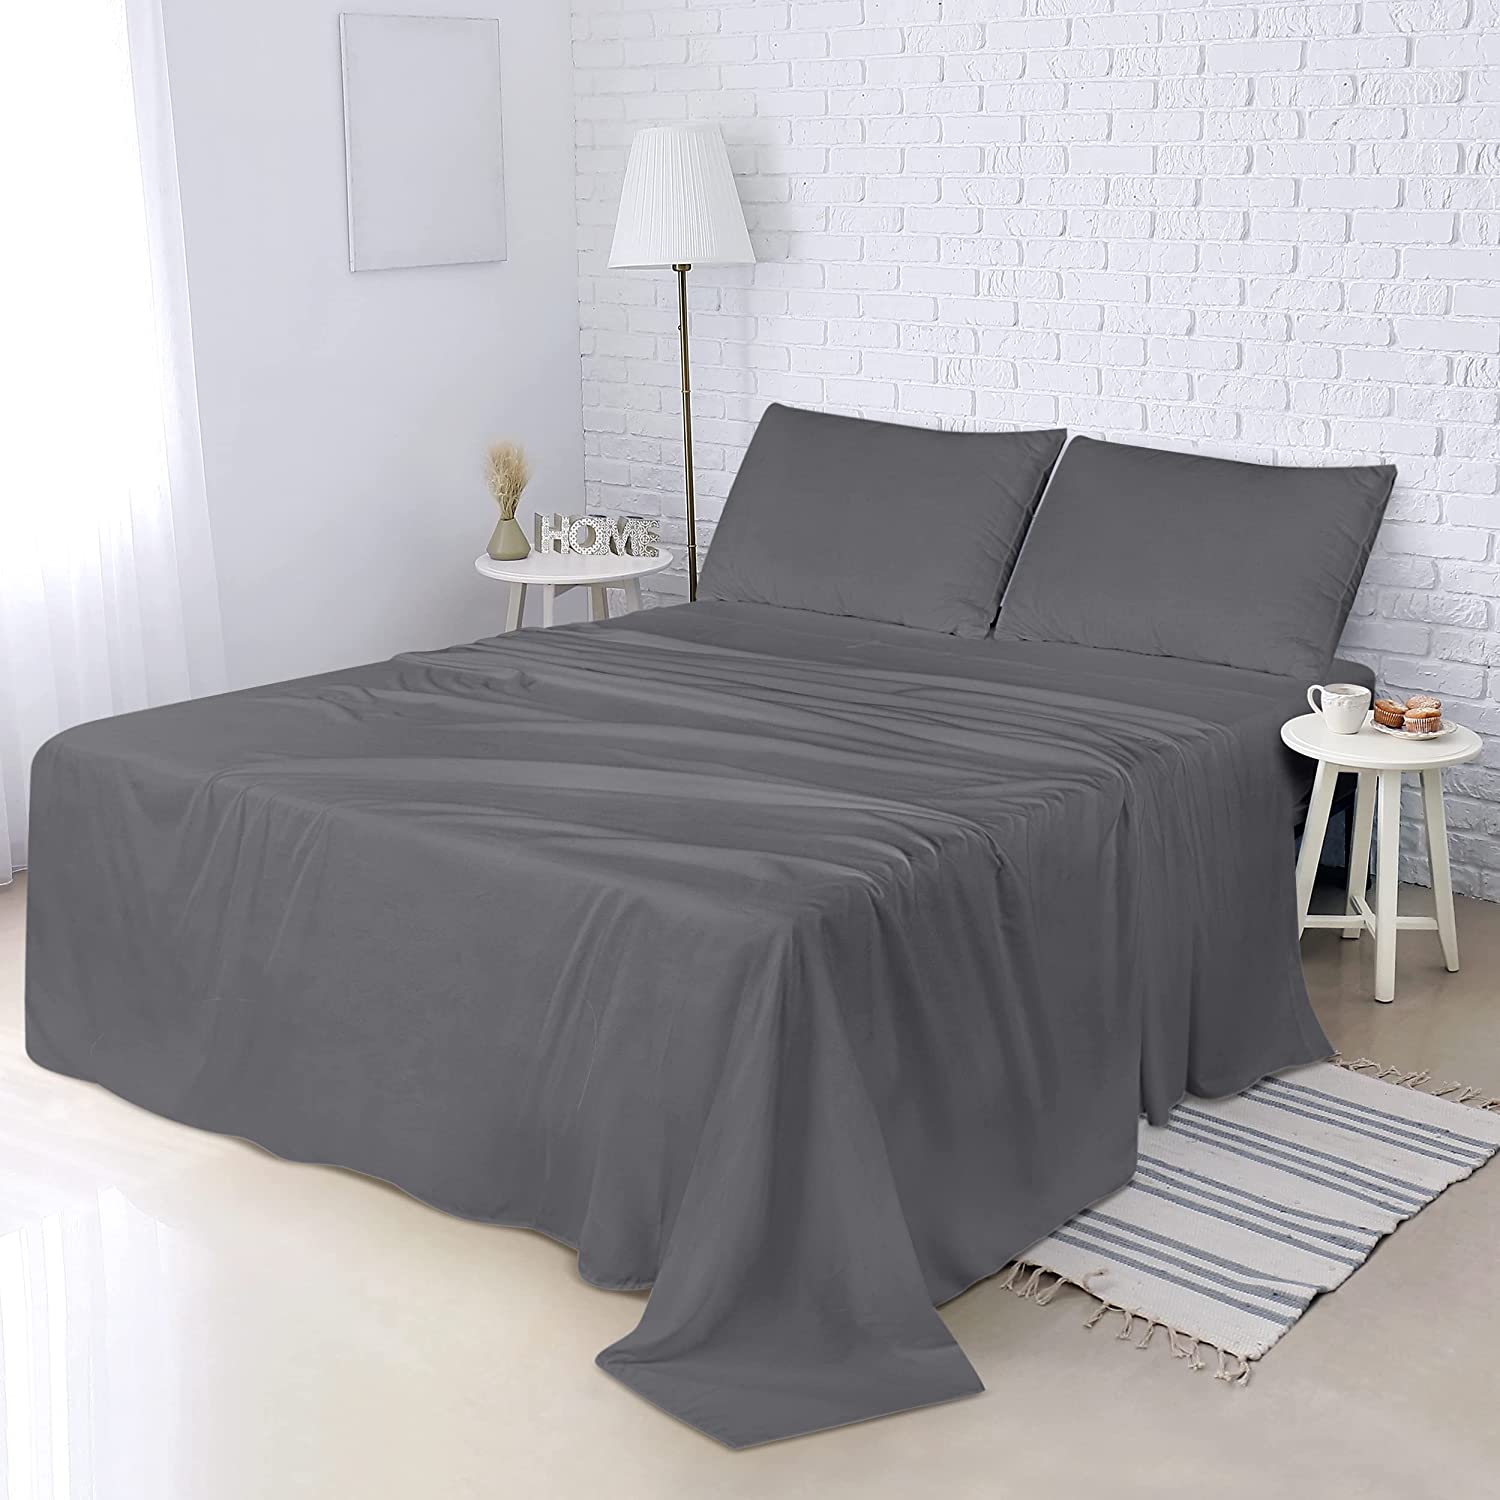 Utopia Bedding King Bed Sheets Set - 4 Piece Bedding - Brushed Microfiber -  Shrinkage and Fade Resistant - Easy care (King, Brow